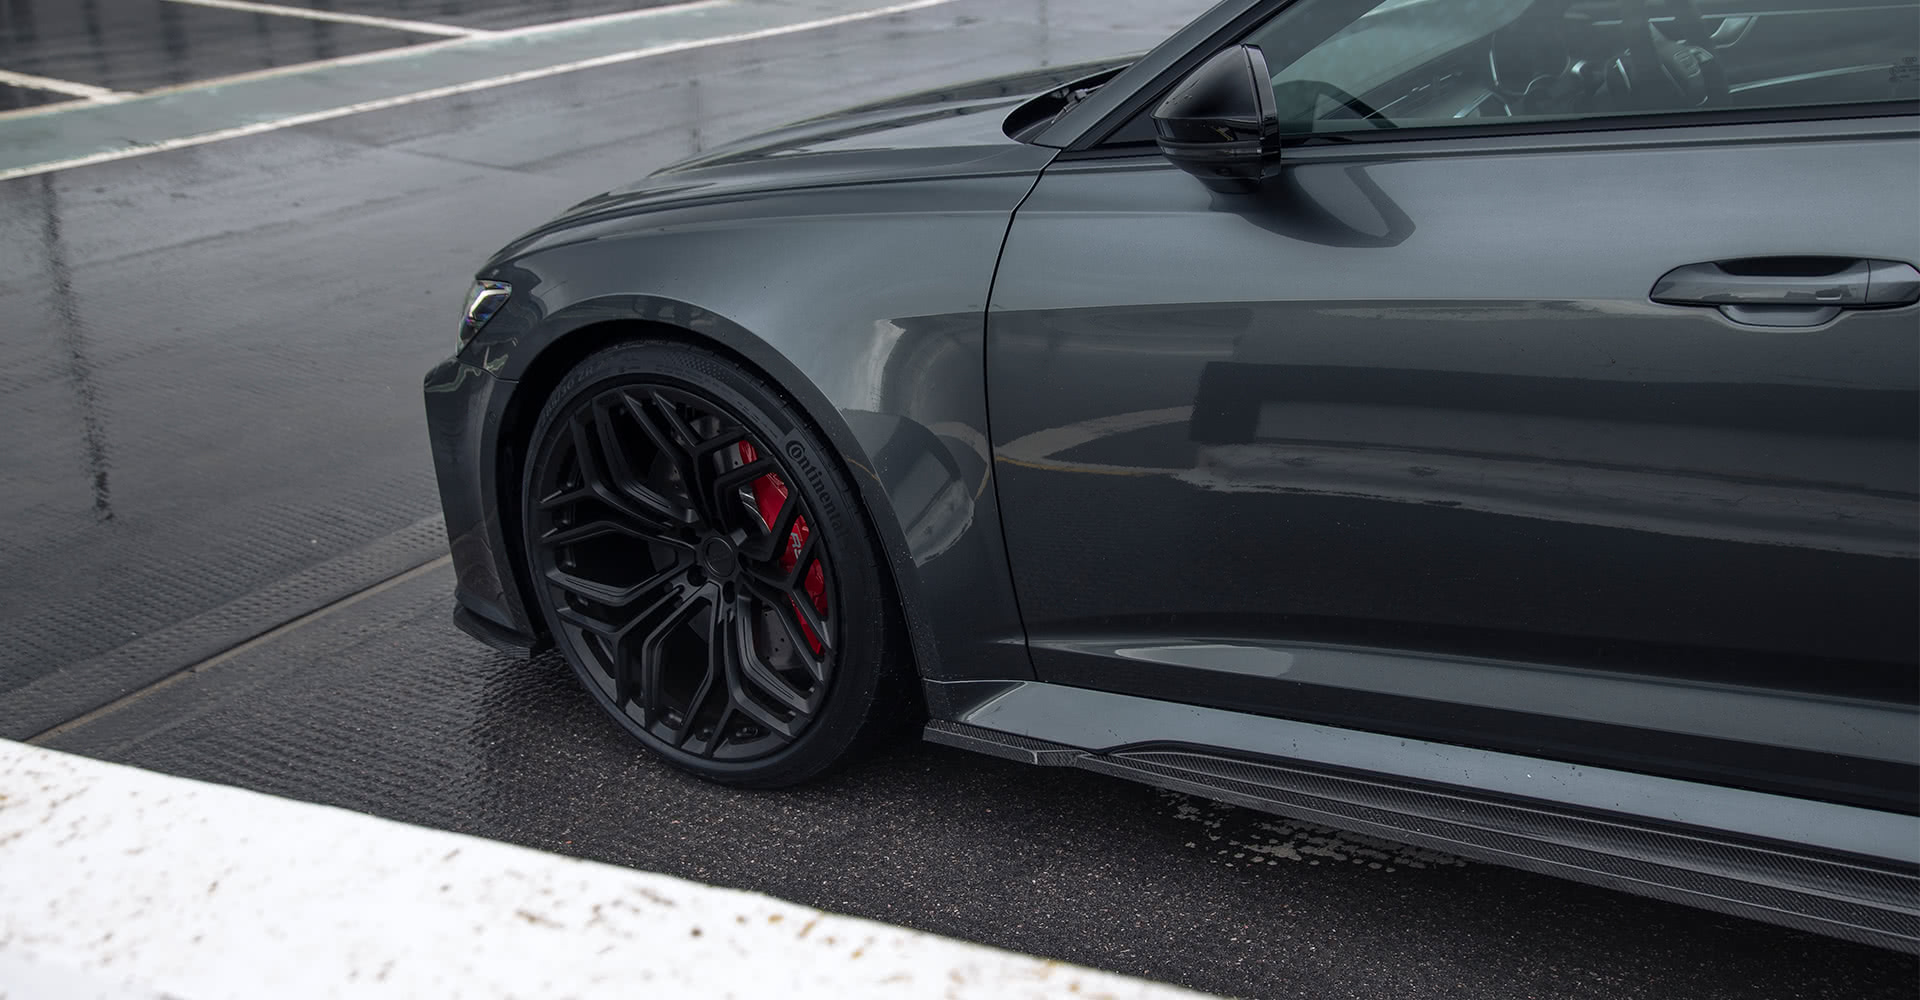 Check our price and buy Urban carbon fiber body kit set for Audi RS6 C8